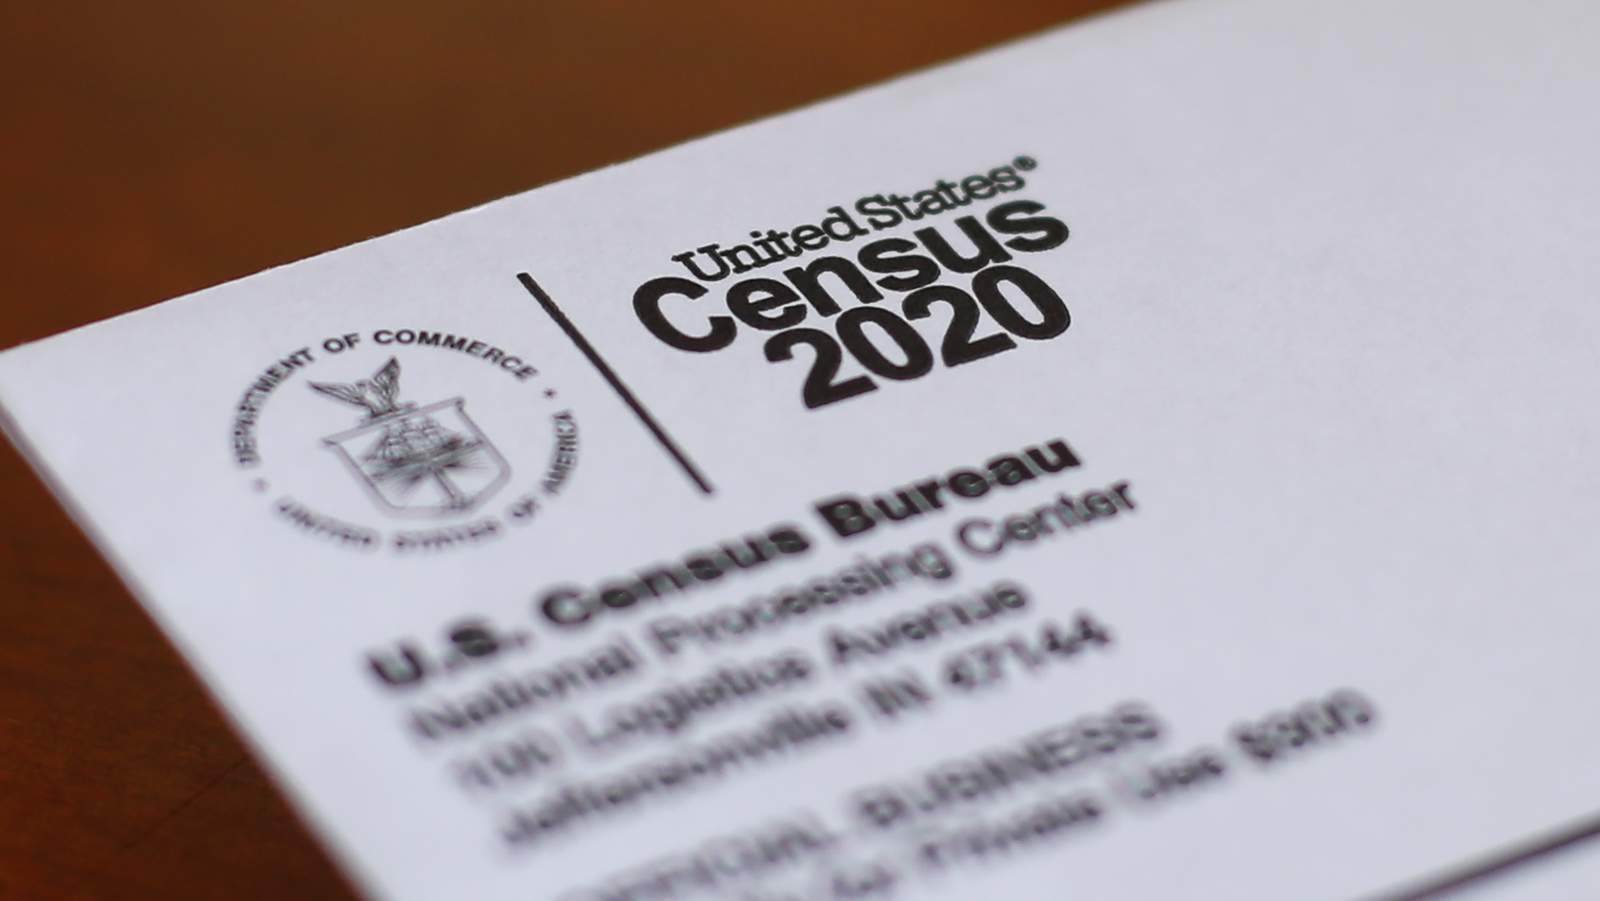 Census car caravan will remind San Antonio residents to get counted